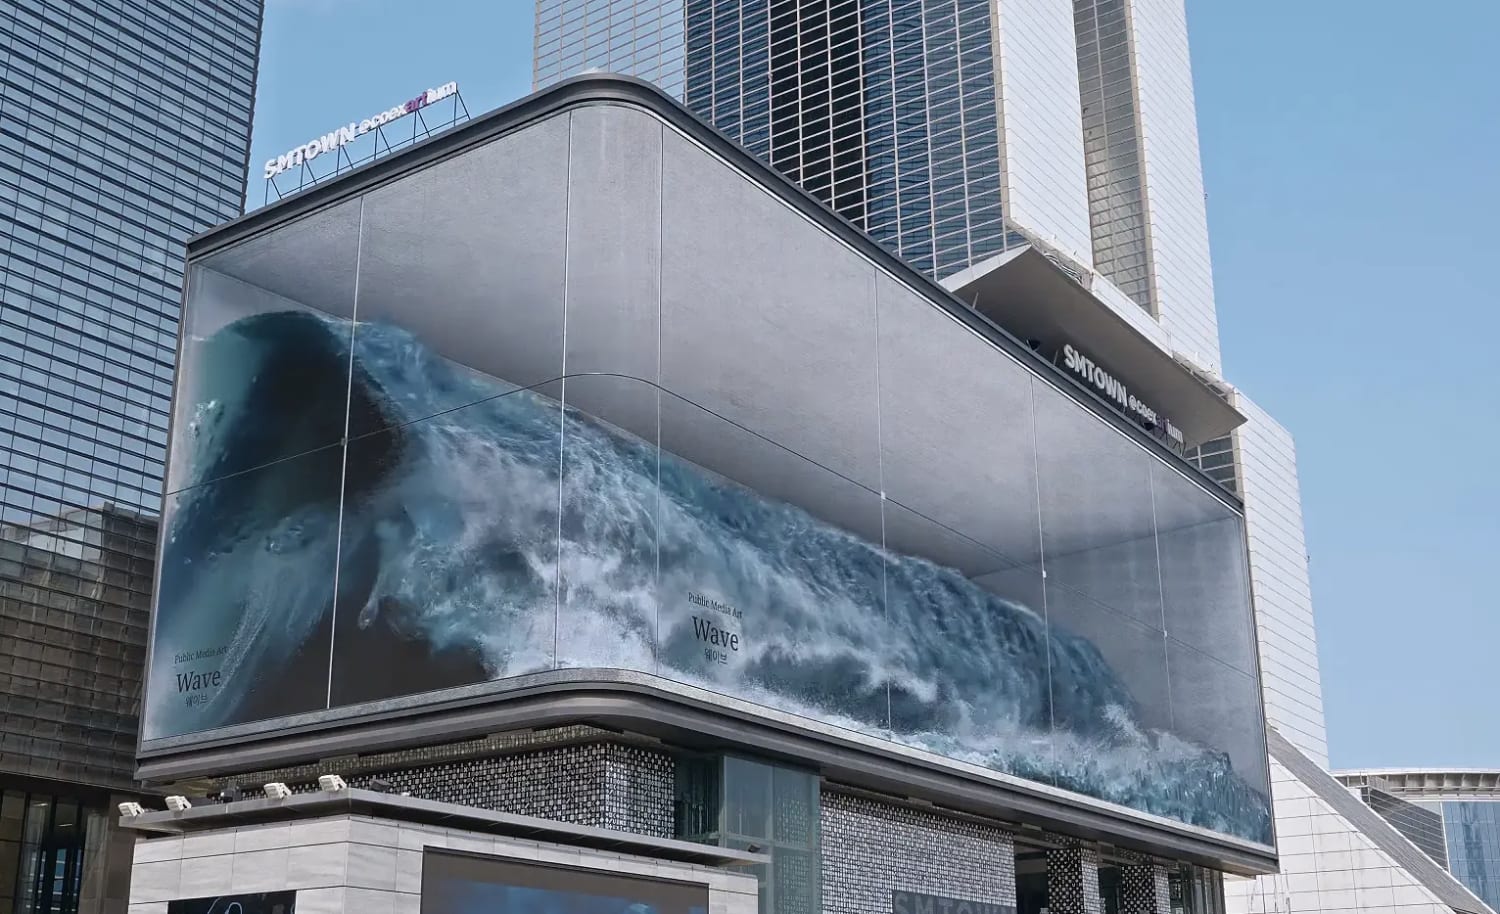 This Huge Crashing Wave in a Seoul Aquarium Is Actually a Gigantic Optical Illusion